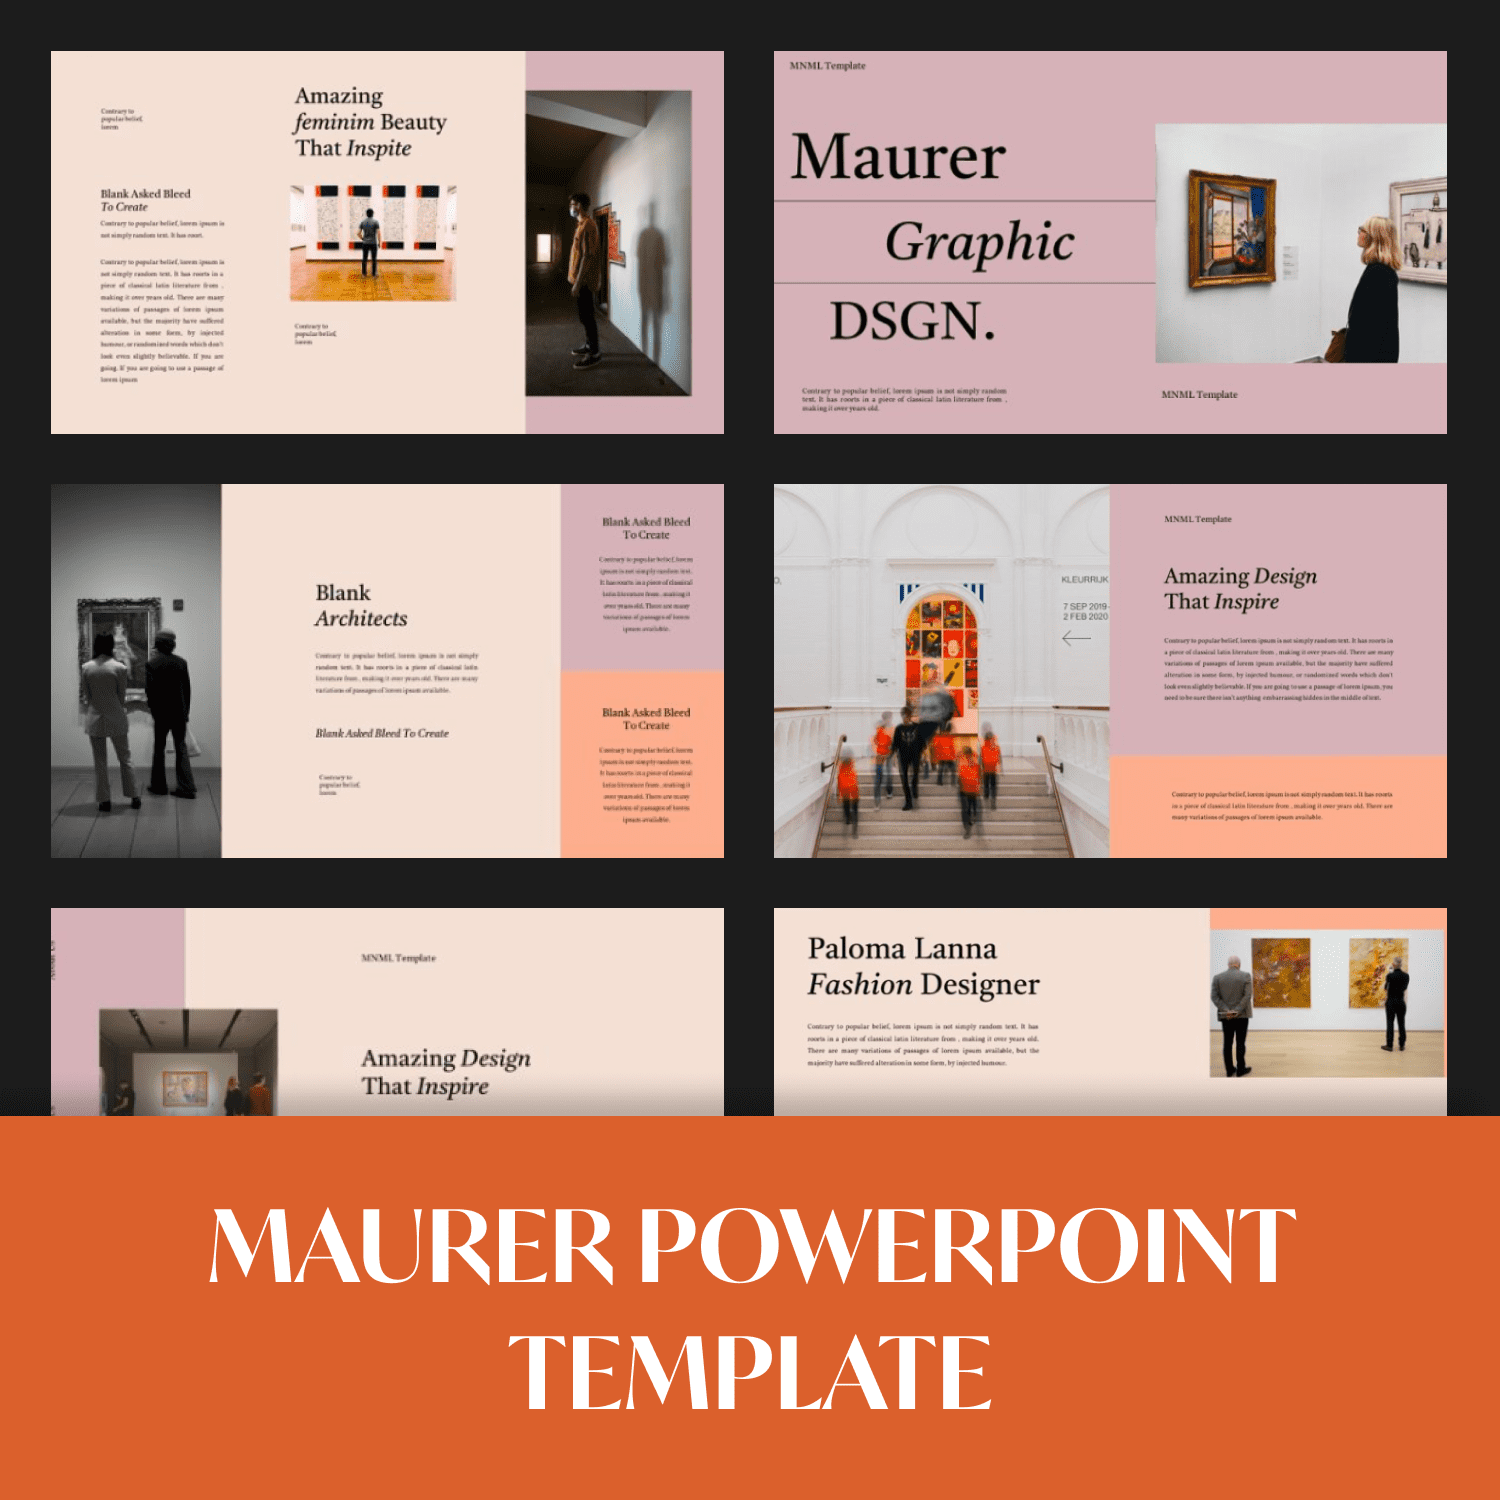 Maurer Powerpoint Templatee by MasterBundles preview mockup image.